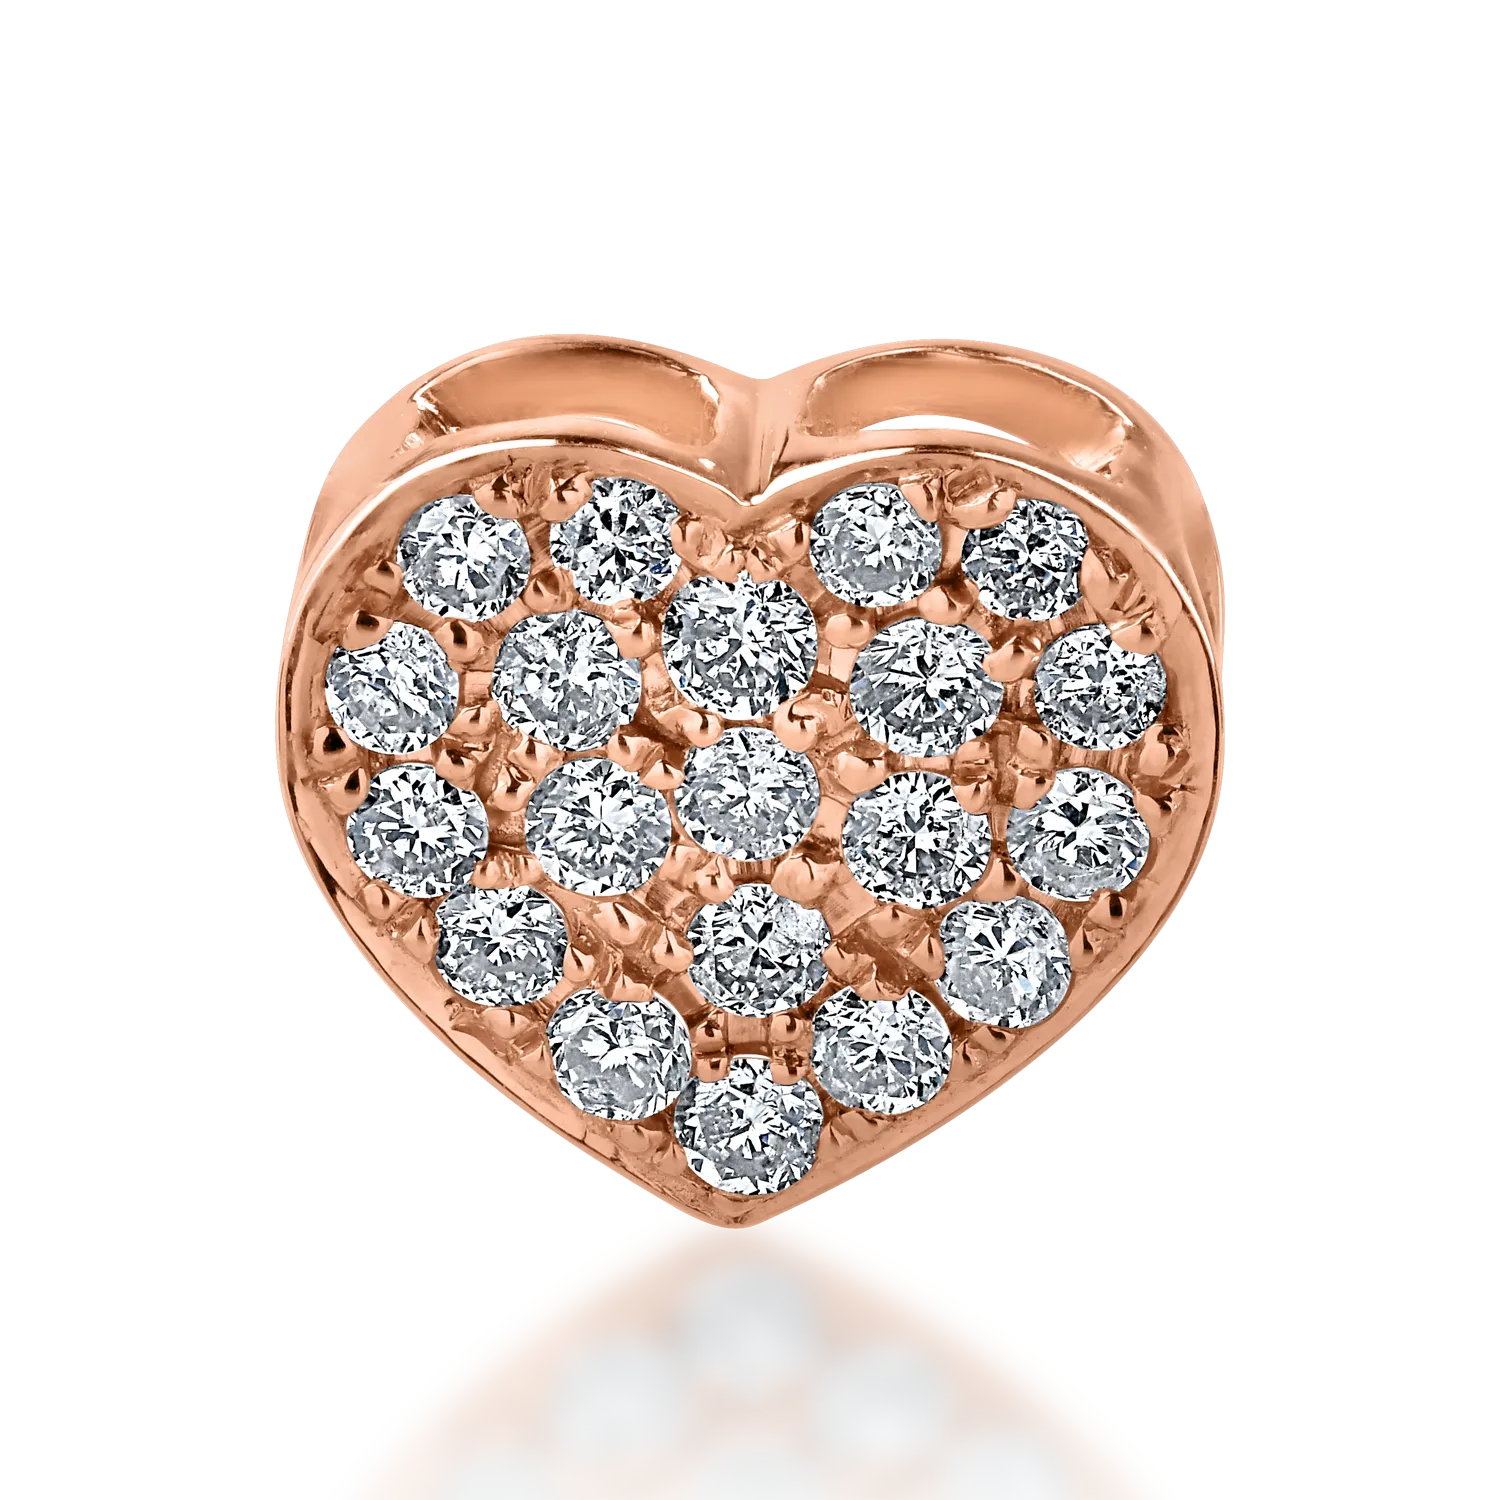 Rose gold heart pendant with 0.22ct diamonds